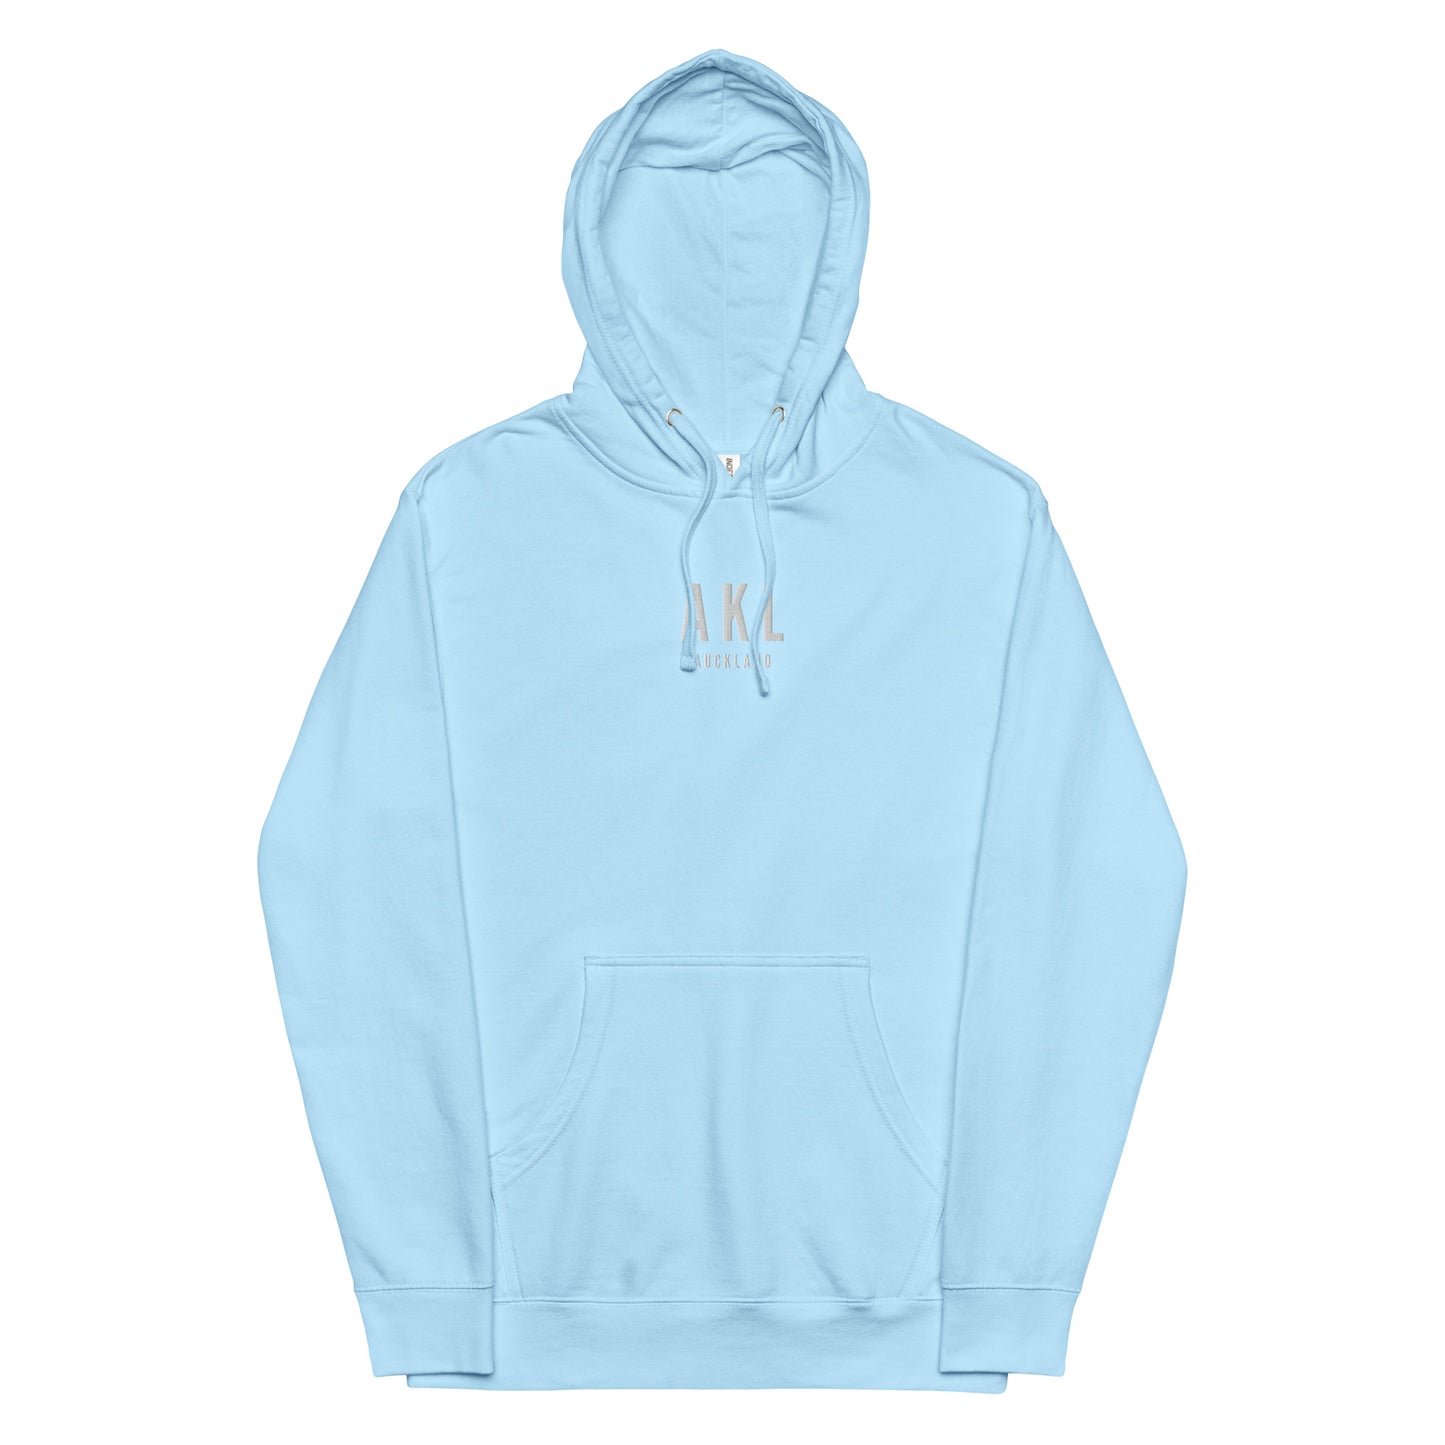 City Midweight Hoodie - White • AKL Auckland • YHM Designs - Image 14